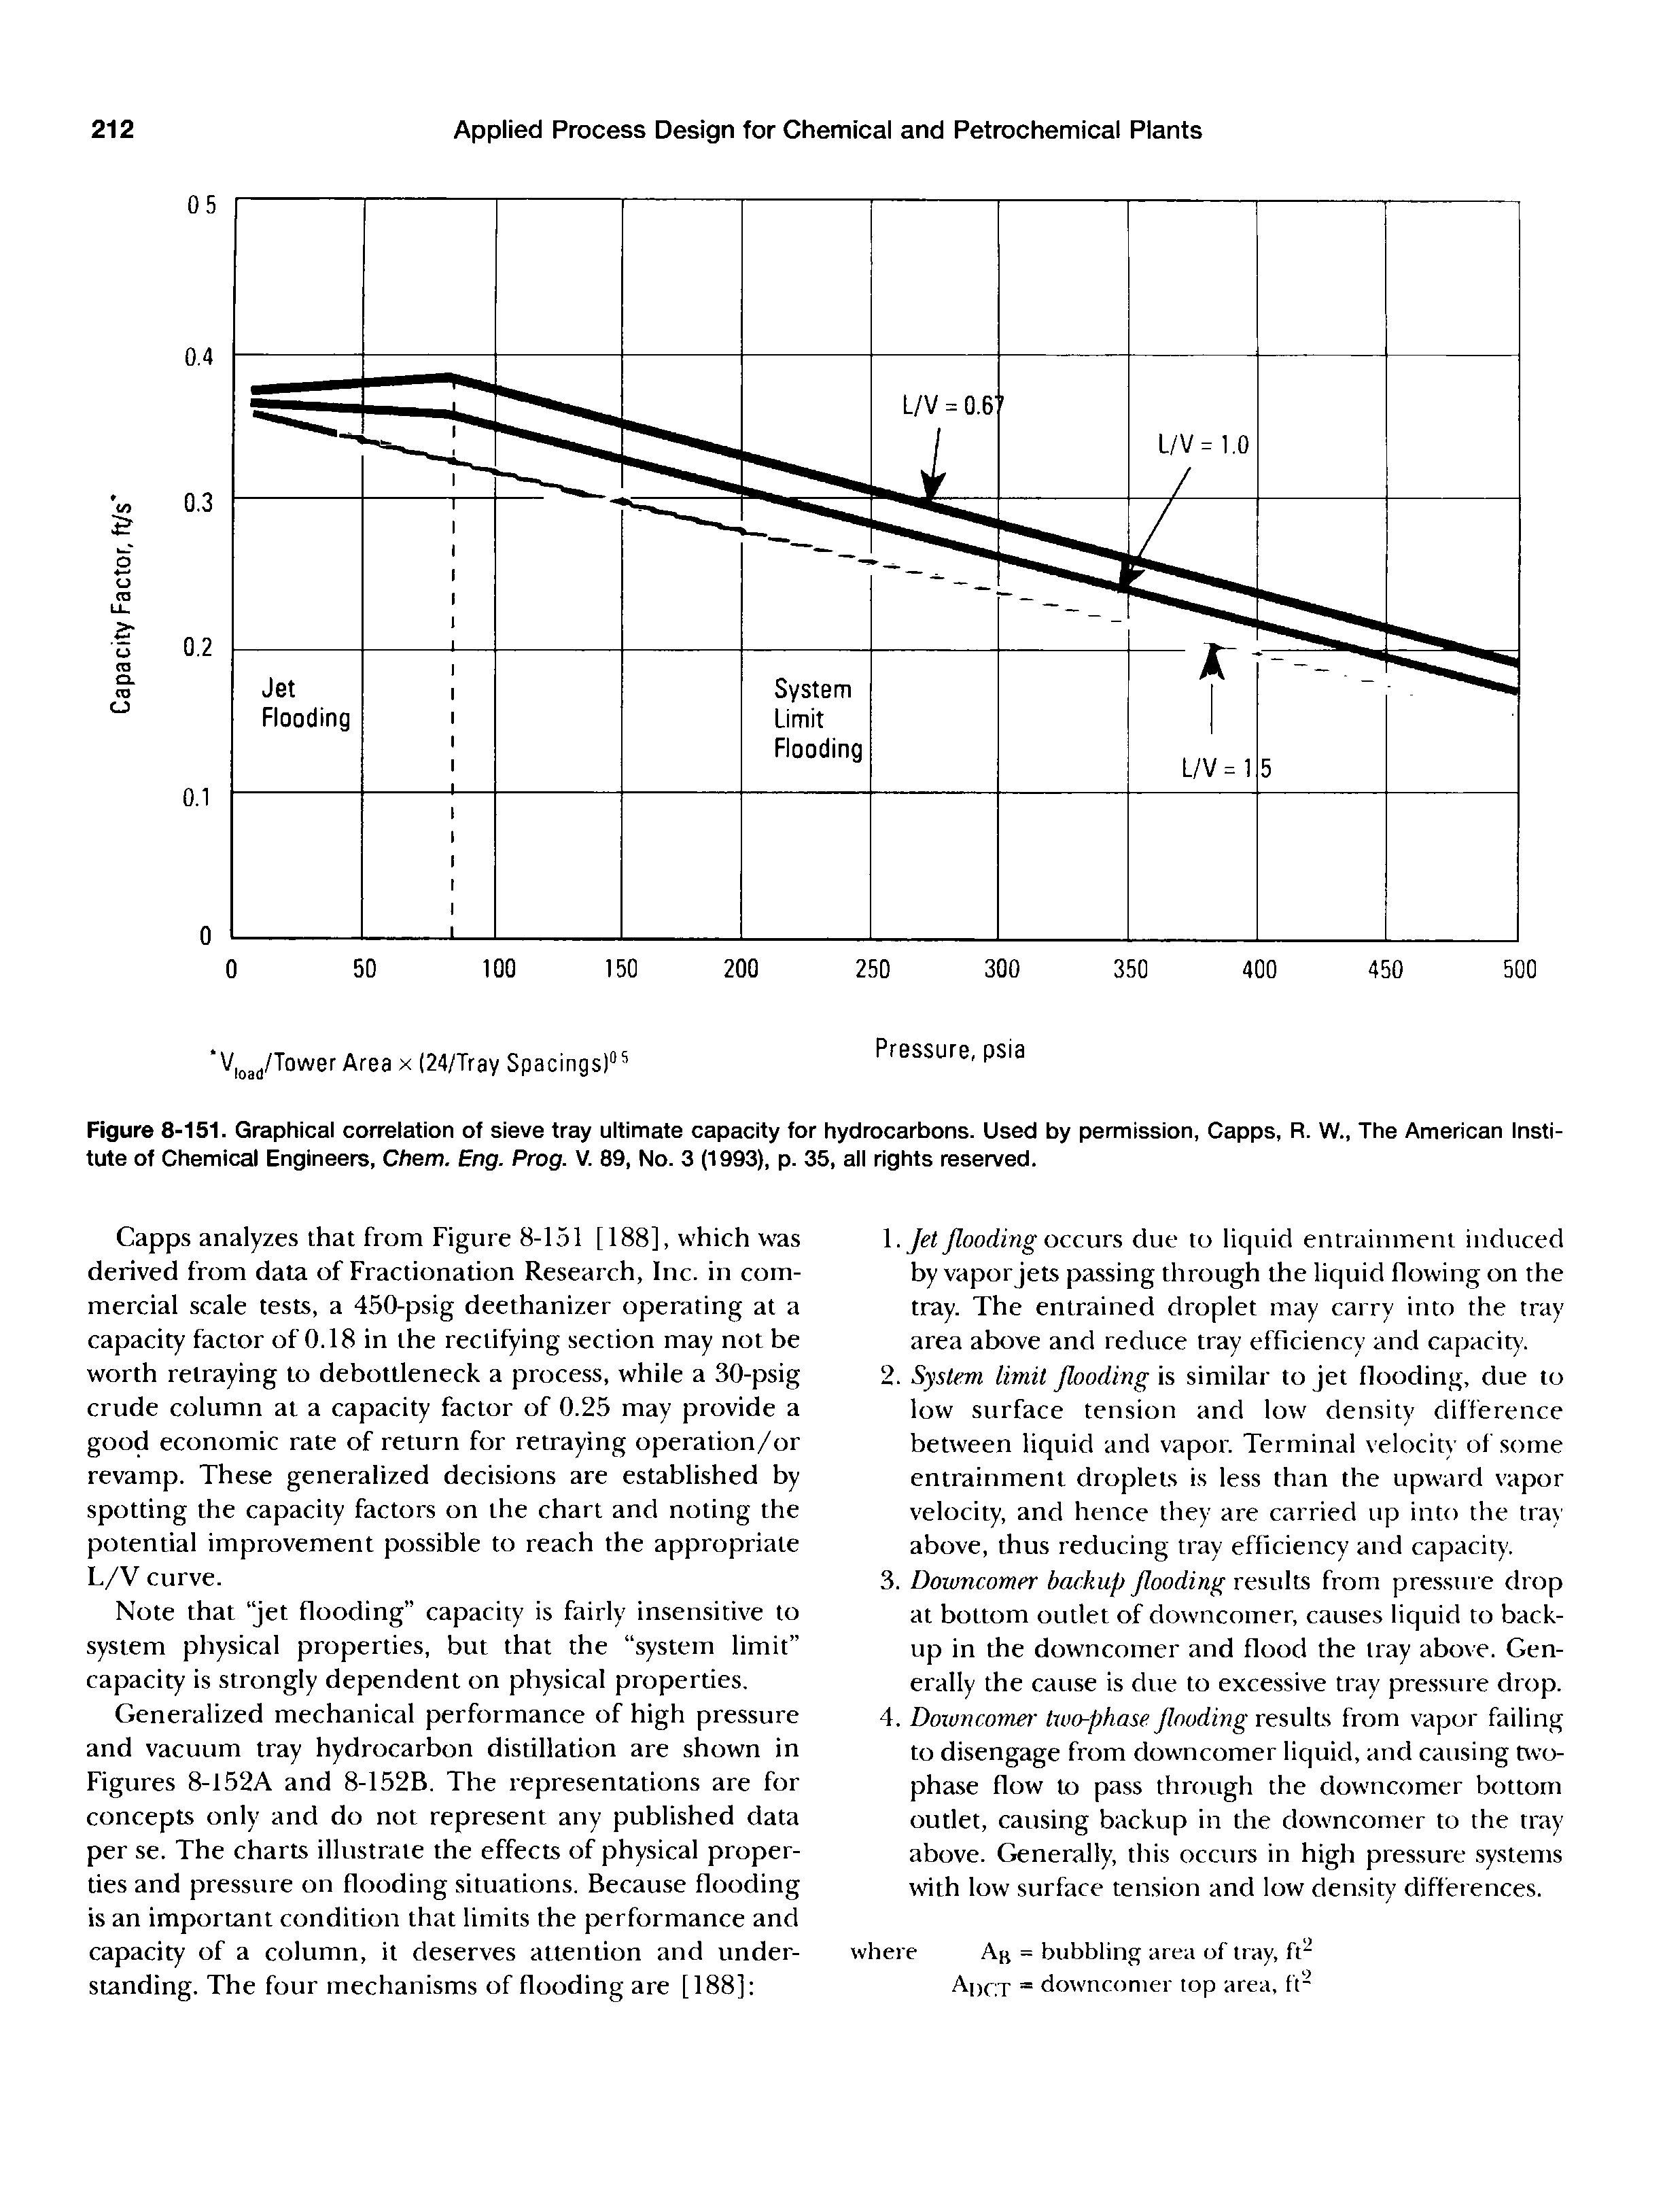 Figure 8-151. Graphical correlation of sieve tray ultimate capacity for hydrocarbons. Used by permission, Capps, R. W., The American Institute of Chemical Engineers, Chem. Eng. Prog. V. 89, No. 3 (1993), p. 35, all rights reserved.